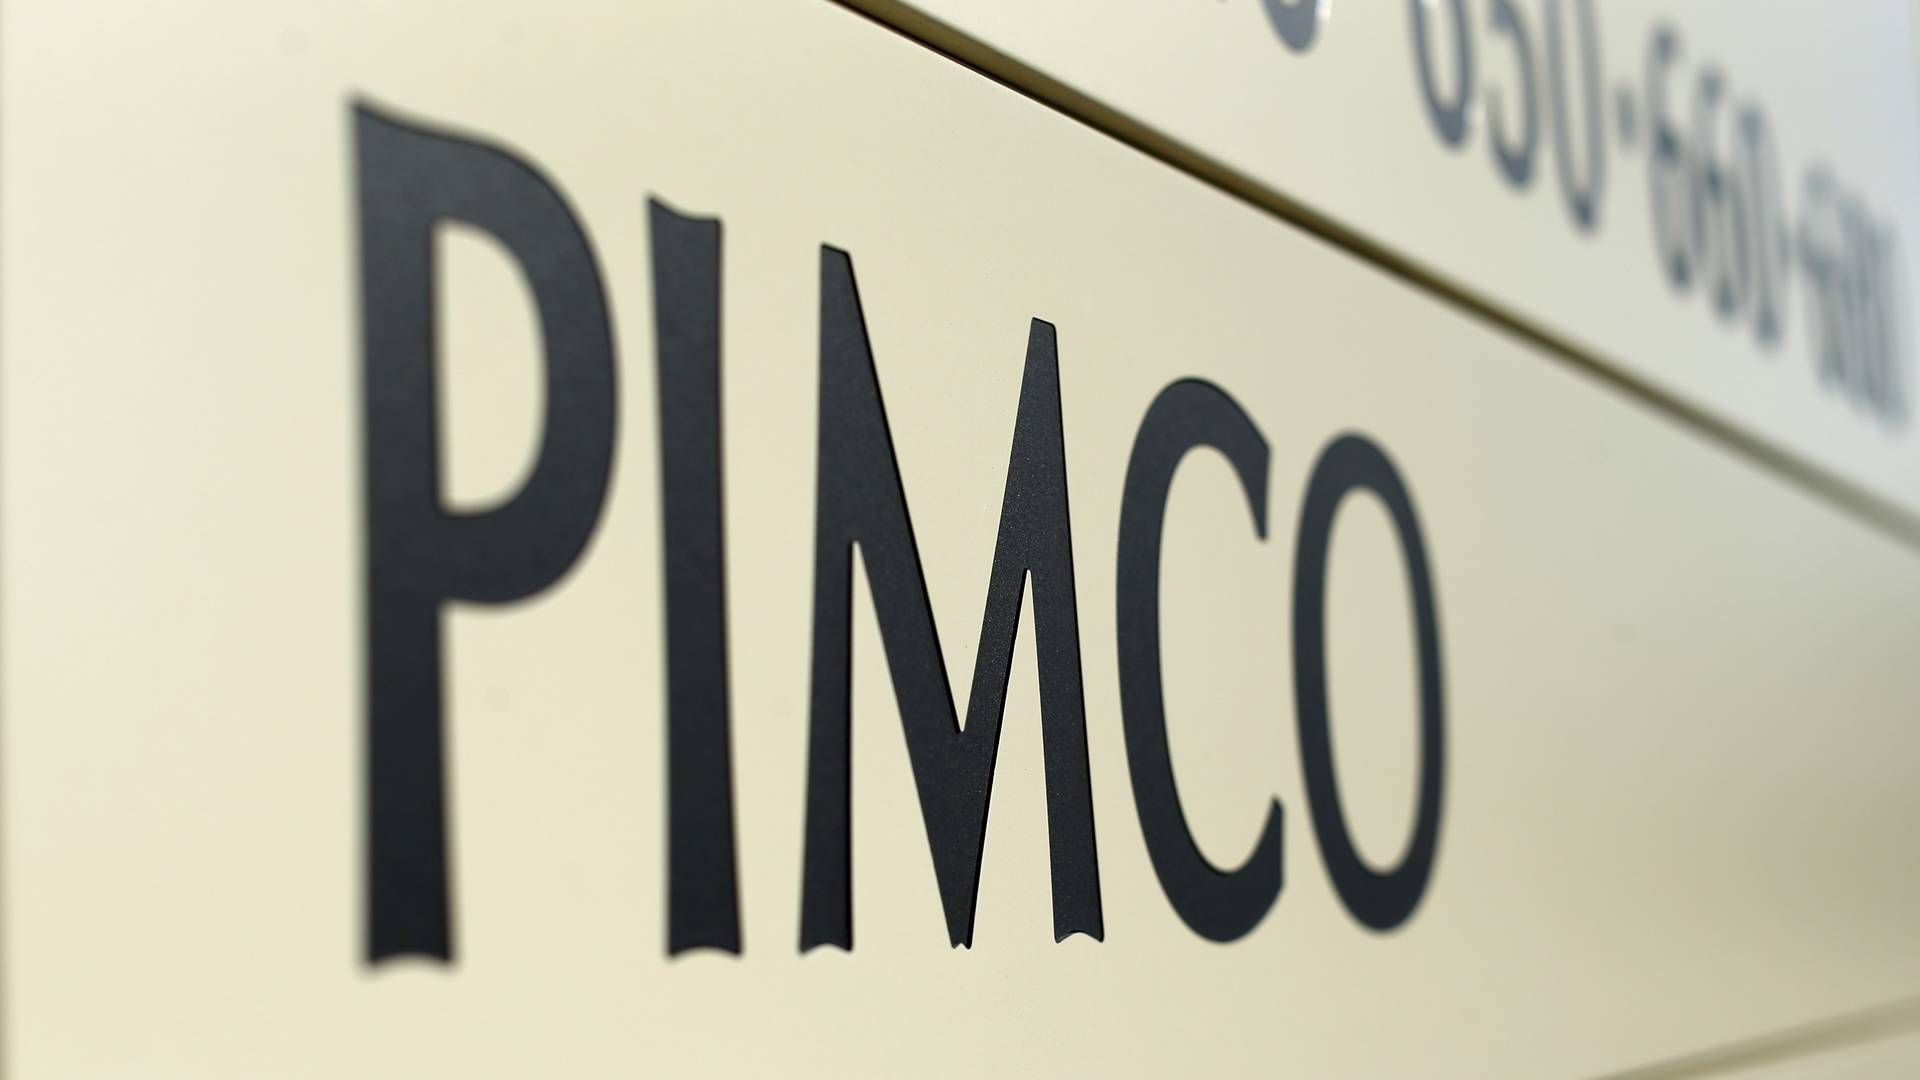 Pimco CEO Manny Roman has been waiting for these kind of opportunities since 2018, when he said in an interview with Bloomberg News that the firm was preparing for a recession within the next five years. | Photo: Mike Blake/REUTERS / Ritzau Scanpix